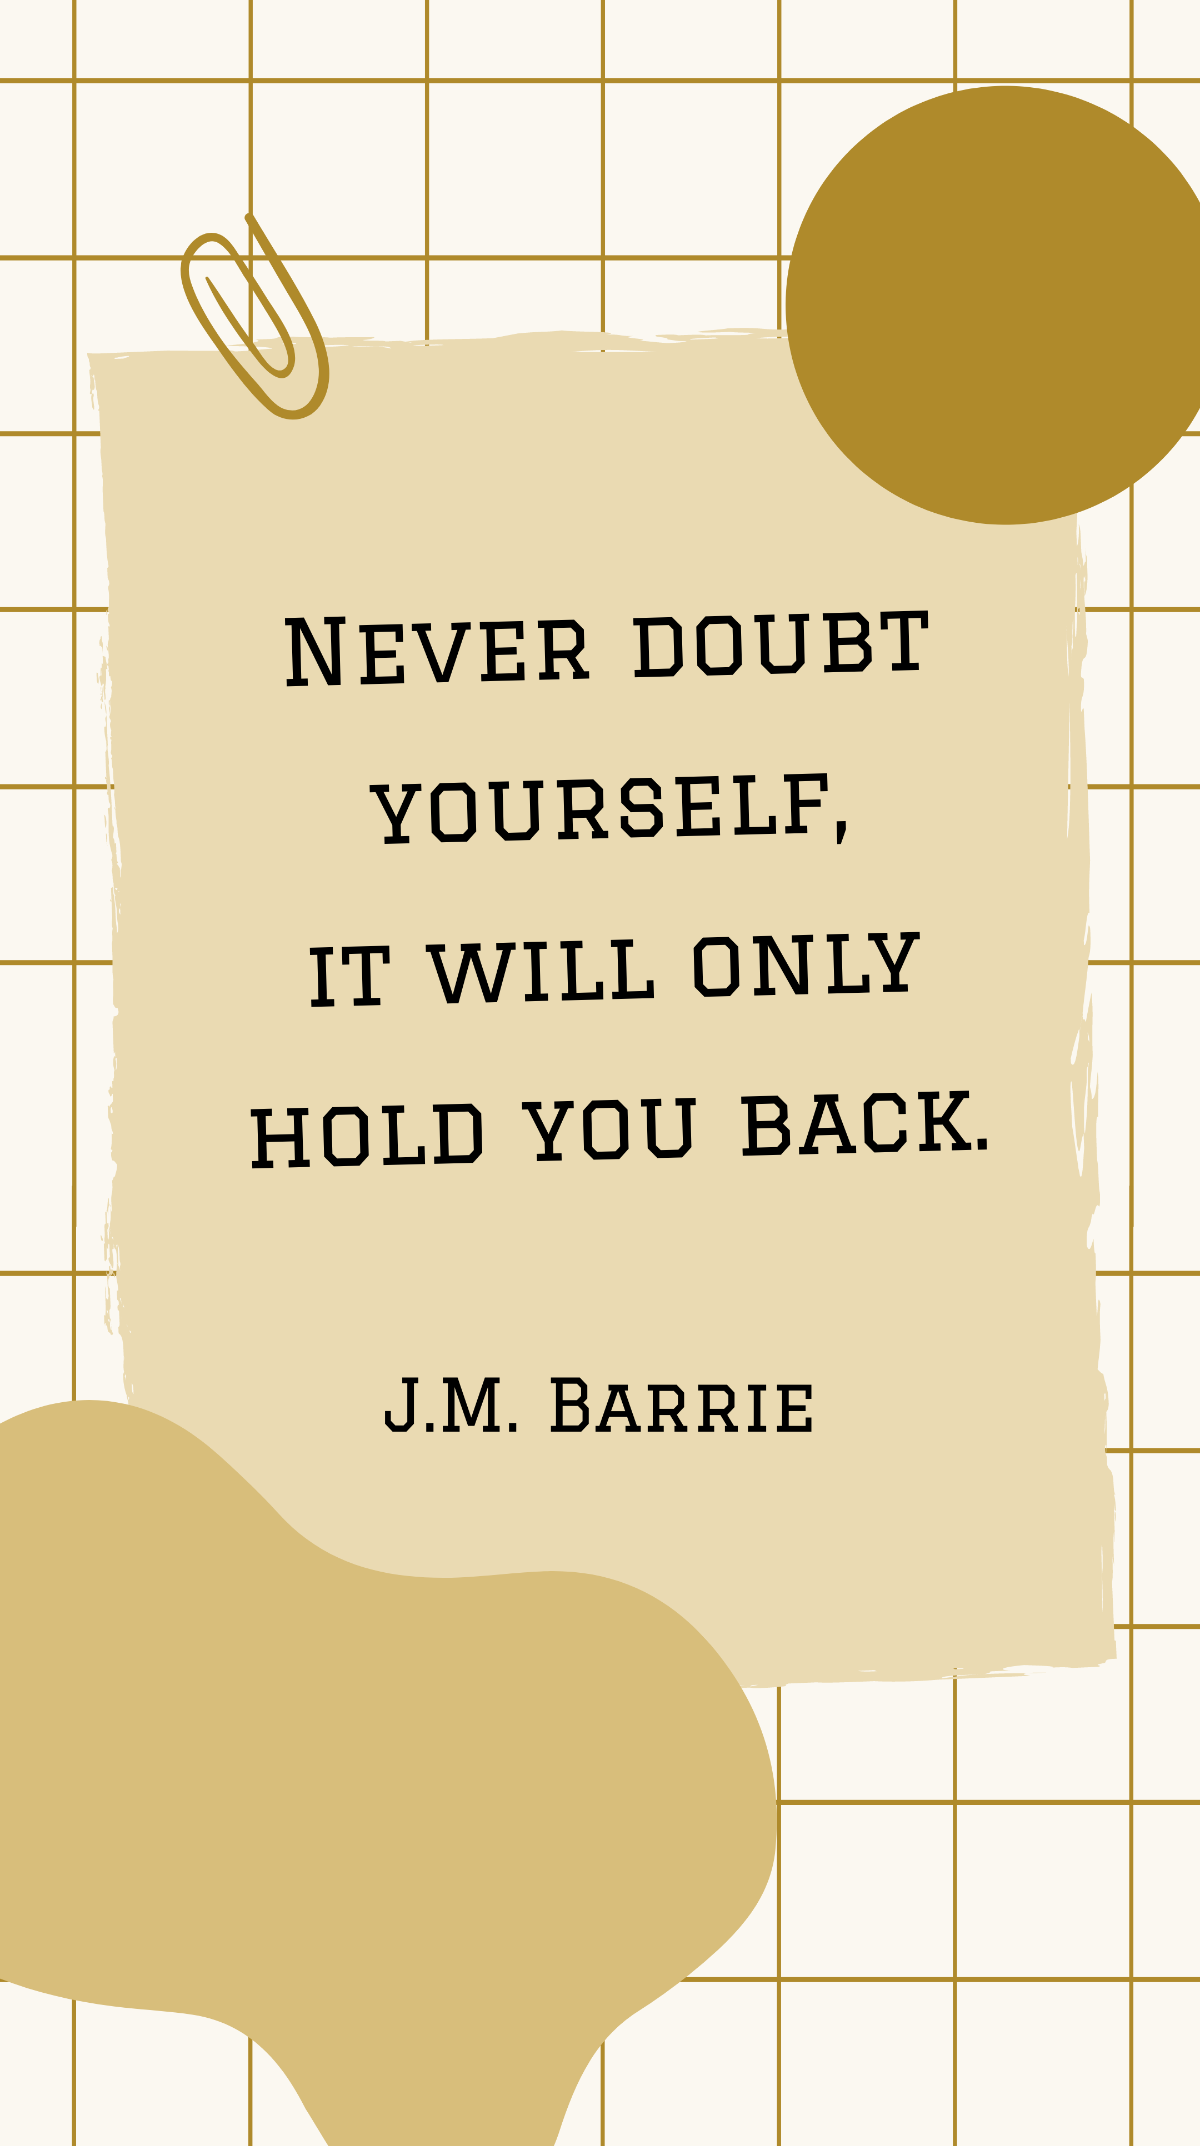 J.M. Barrie - Never doubt yourself, it will only hold you back. Template